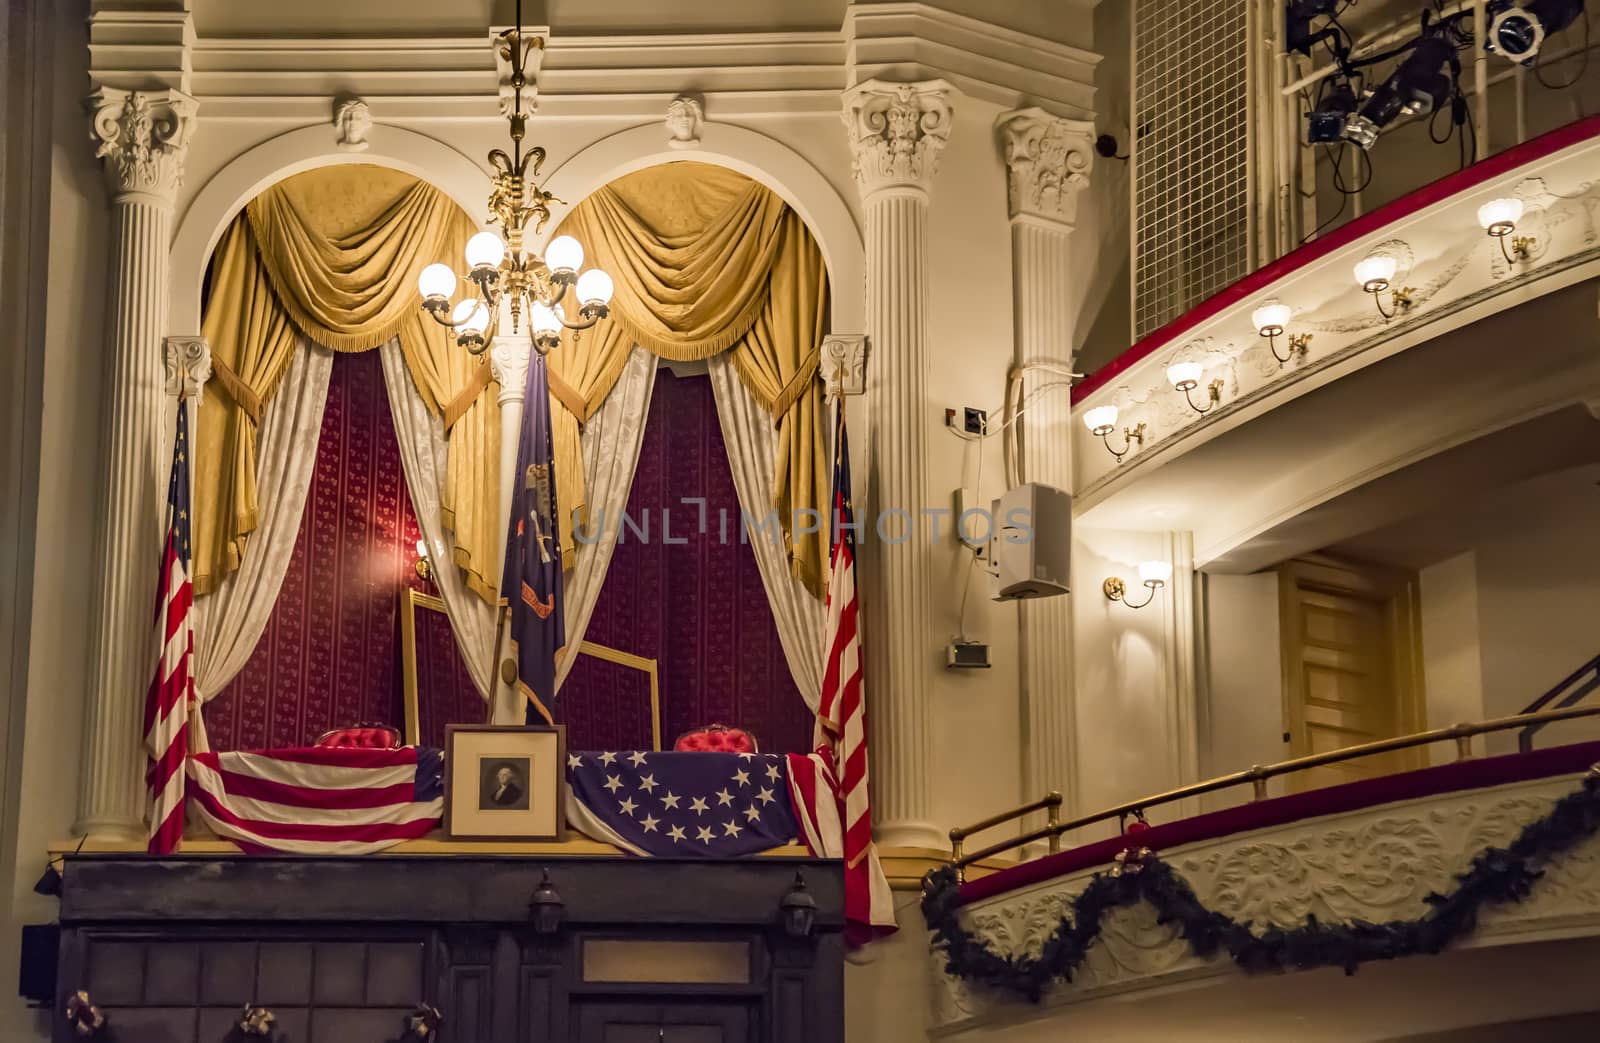 The historic Ford's Theatre, the site of President Lincoln's assassination. by edella